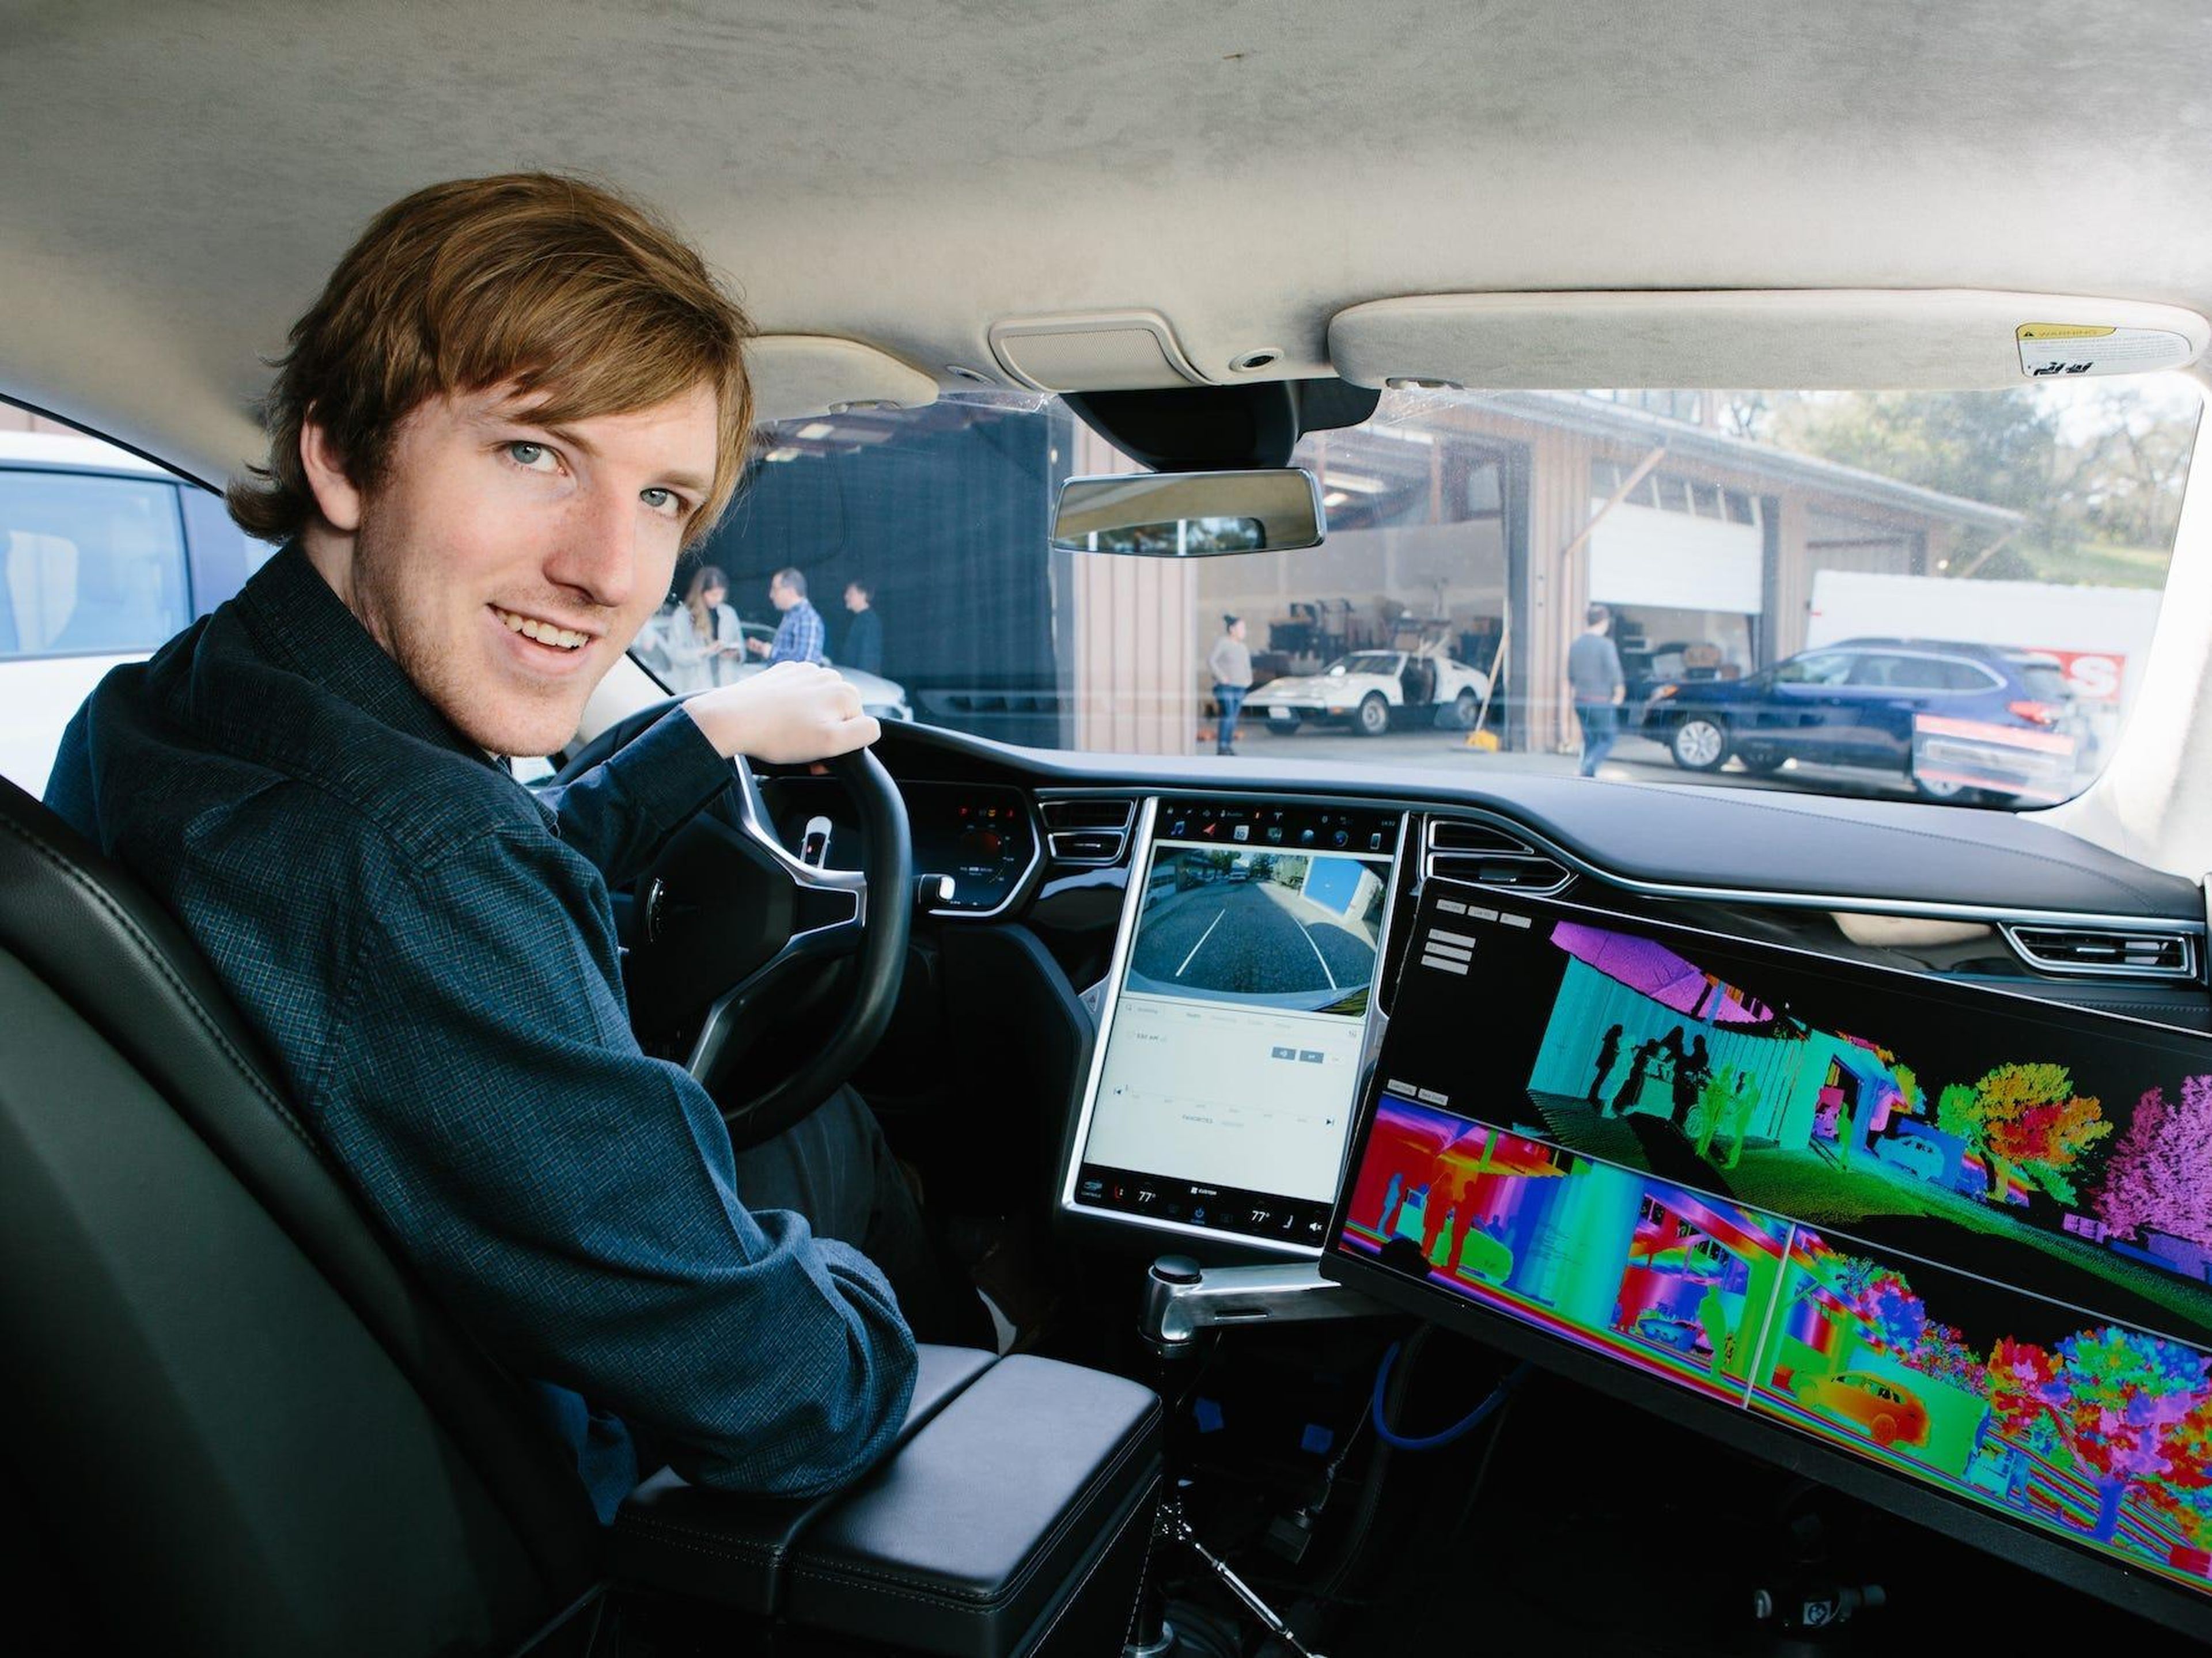 Russell founded Luminar, which creates lidar sensors that help self-driving cars "see" the road, as a teenager.